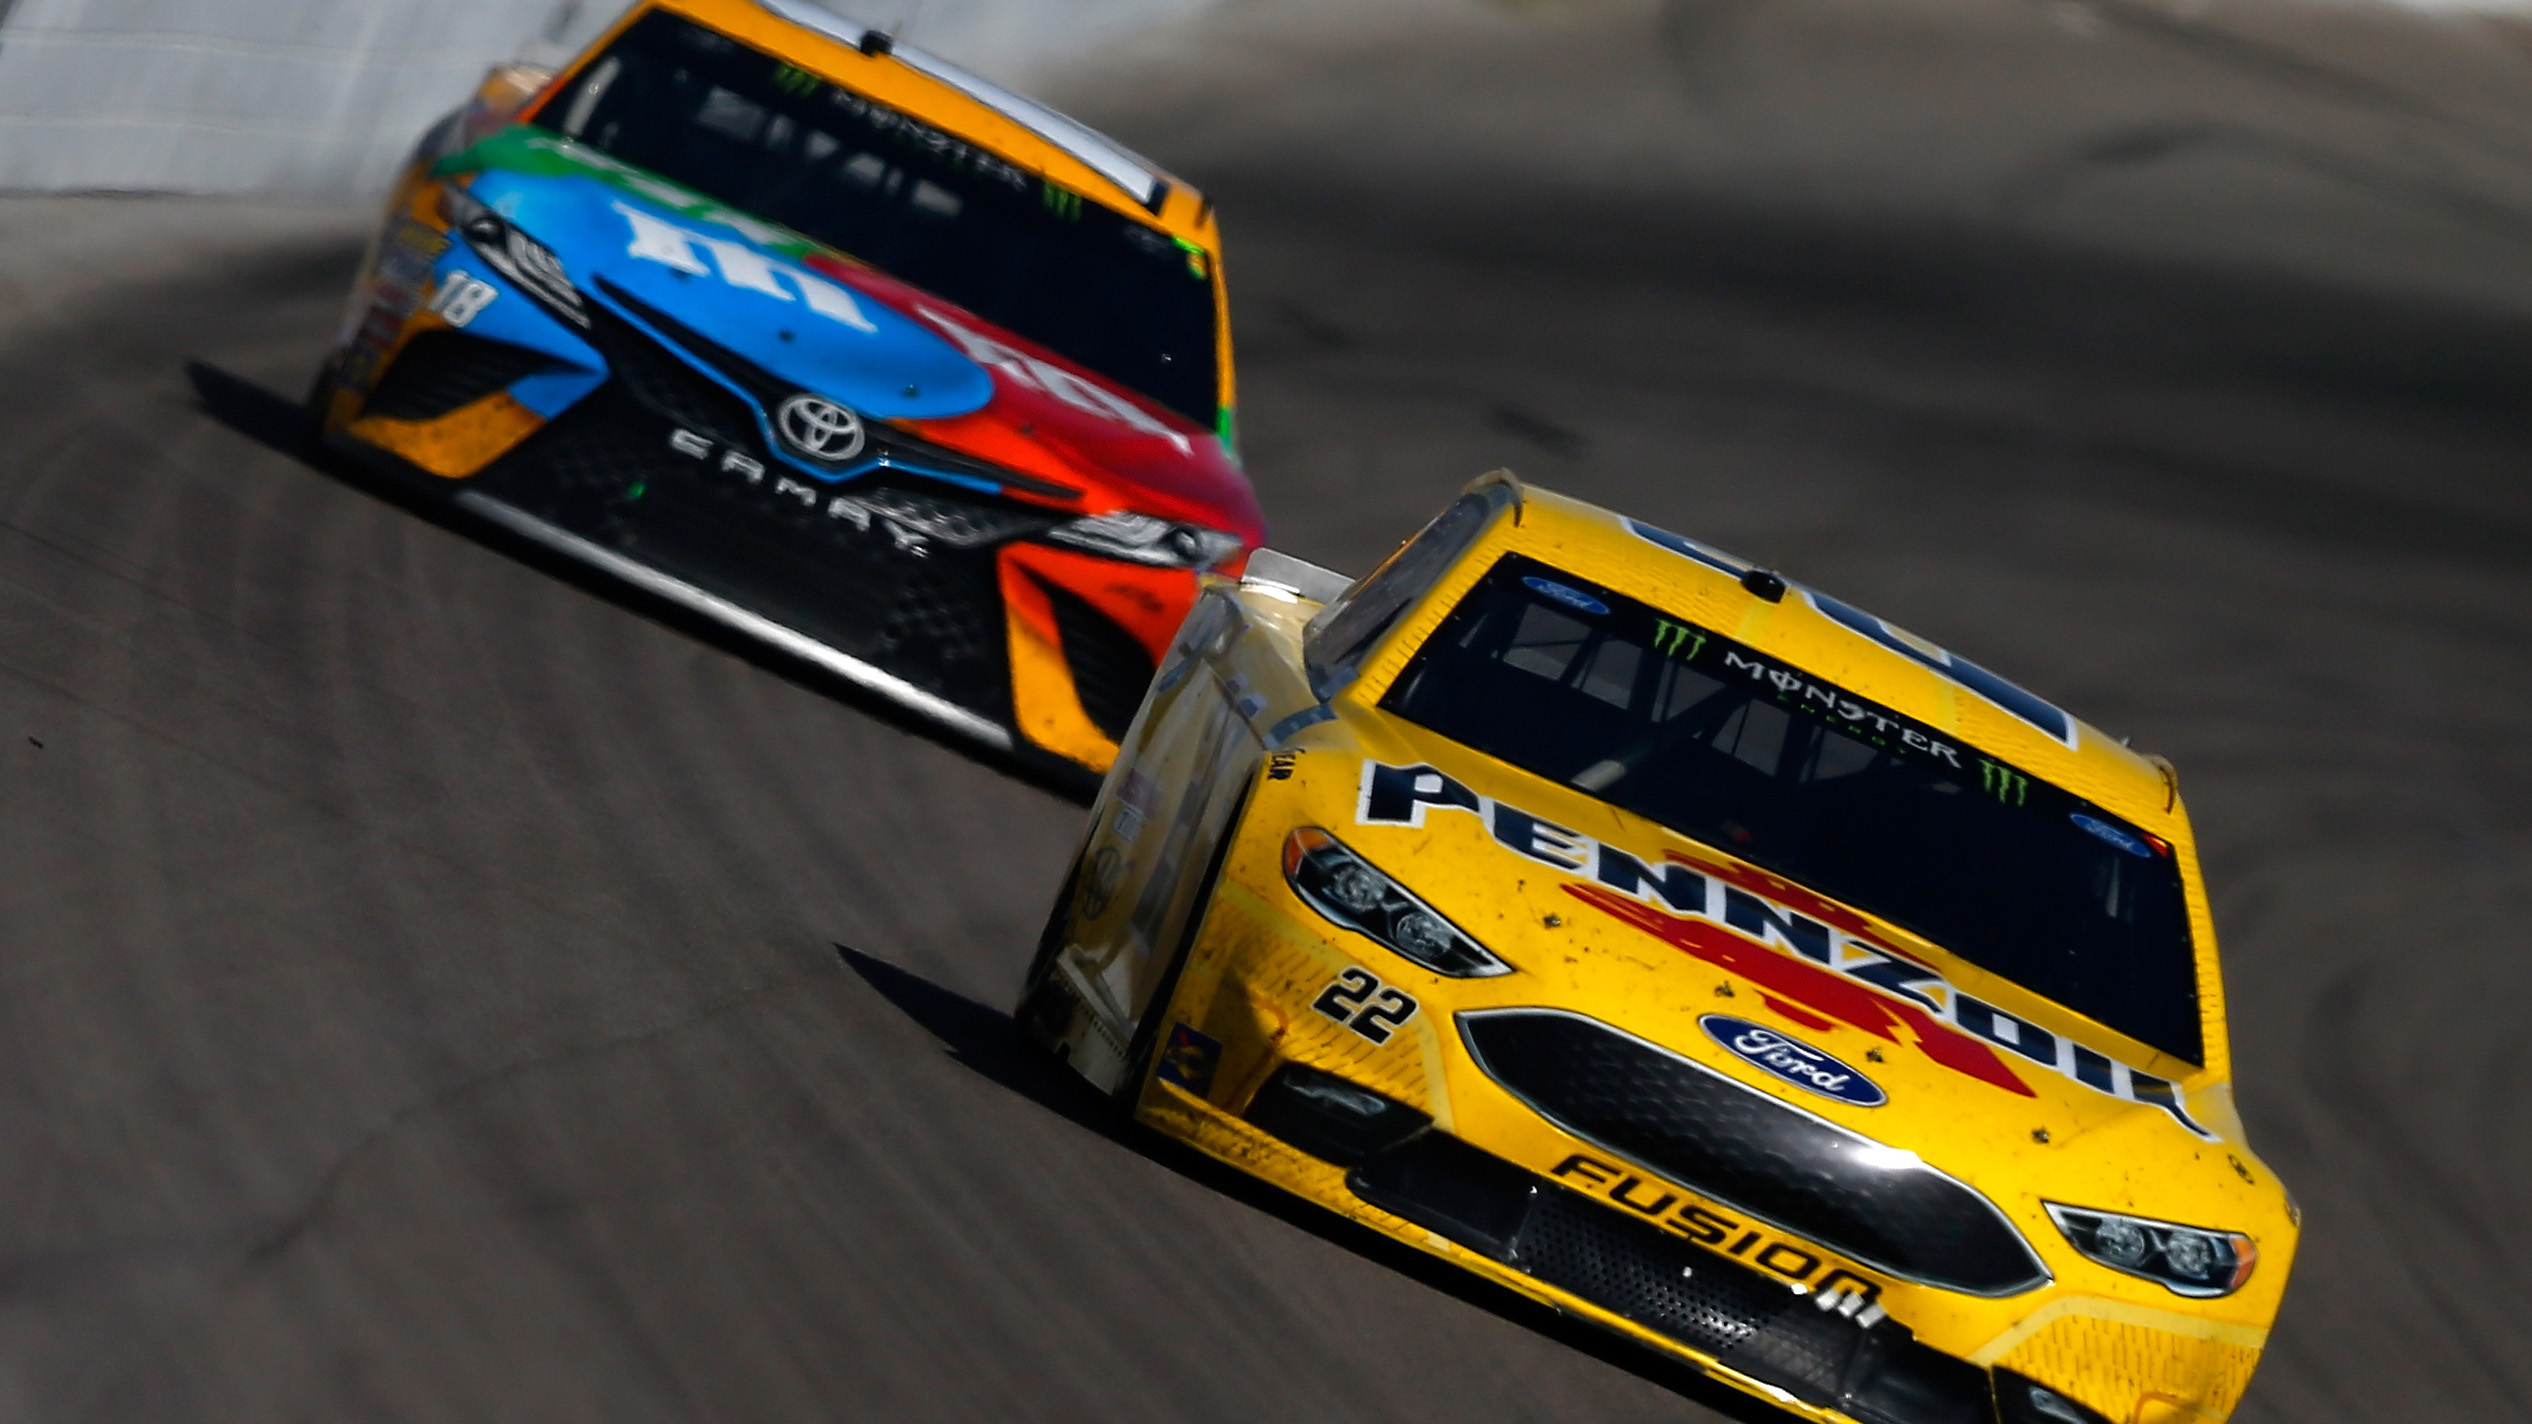 LAS VEGAS, NV - MARCH 12:  Joey Logano, driver of the #22 Pennzoil Ford, leads Kyle Busch, driver of the #18 M&M's Toyota, during the Monster Energy NASCAR Cup Series Kobalt 400 at Las Vegas Motor Speedway on March 12, 2017 in Las Vegas, Nevada.  (Photo by Sean Gardner/Getty Images)